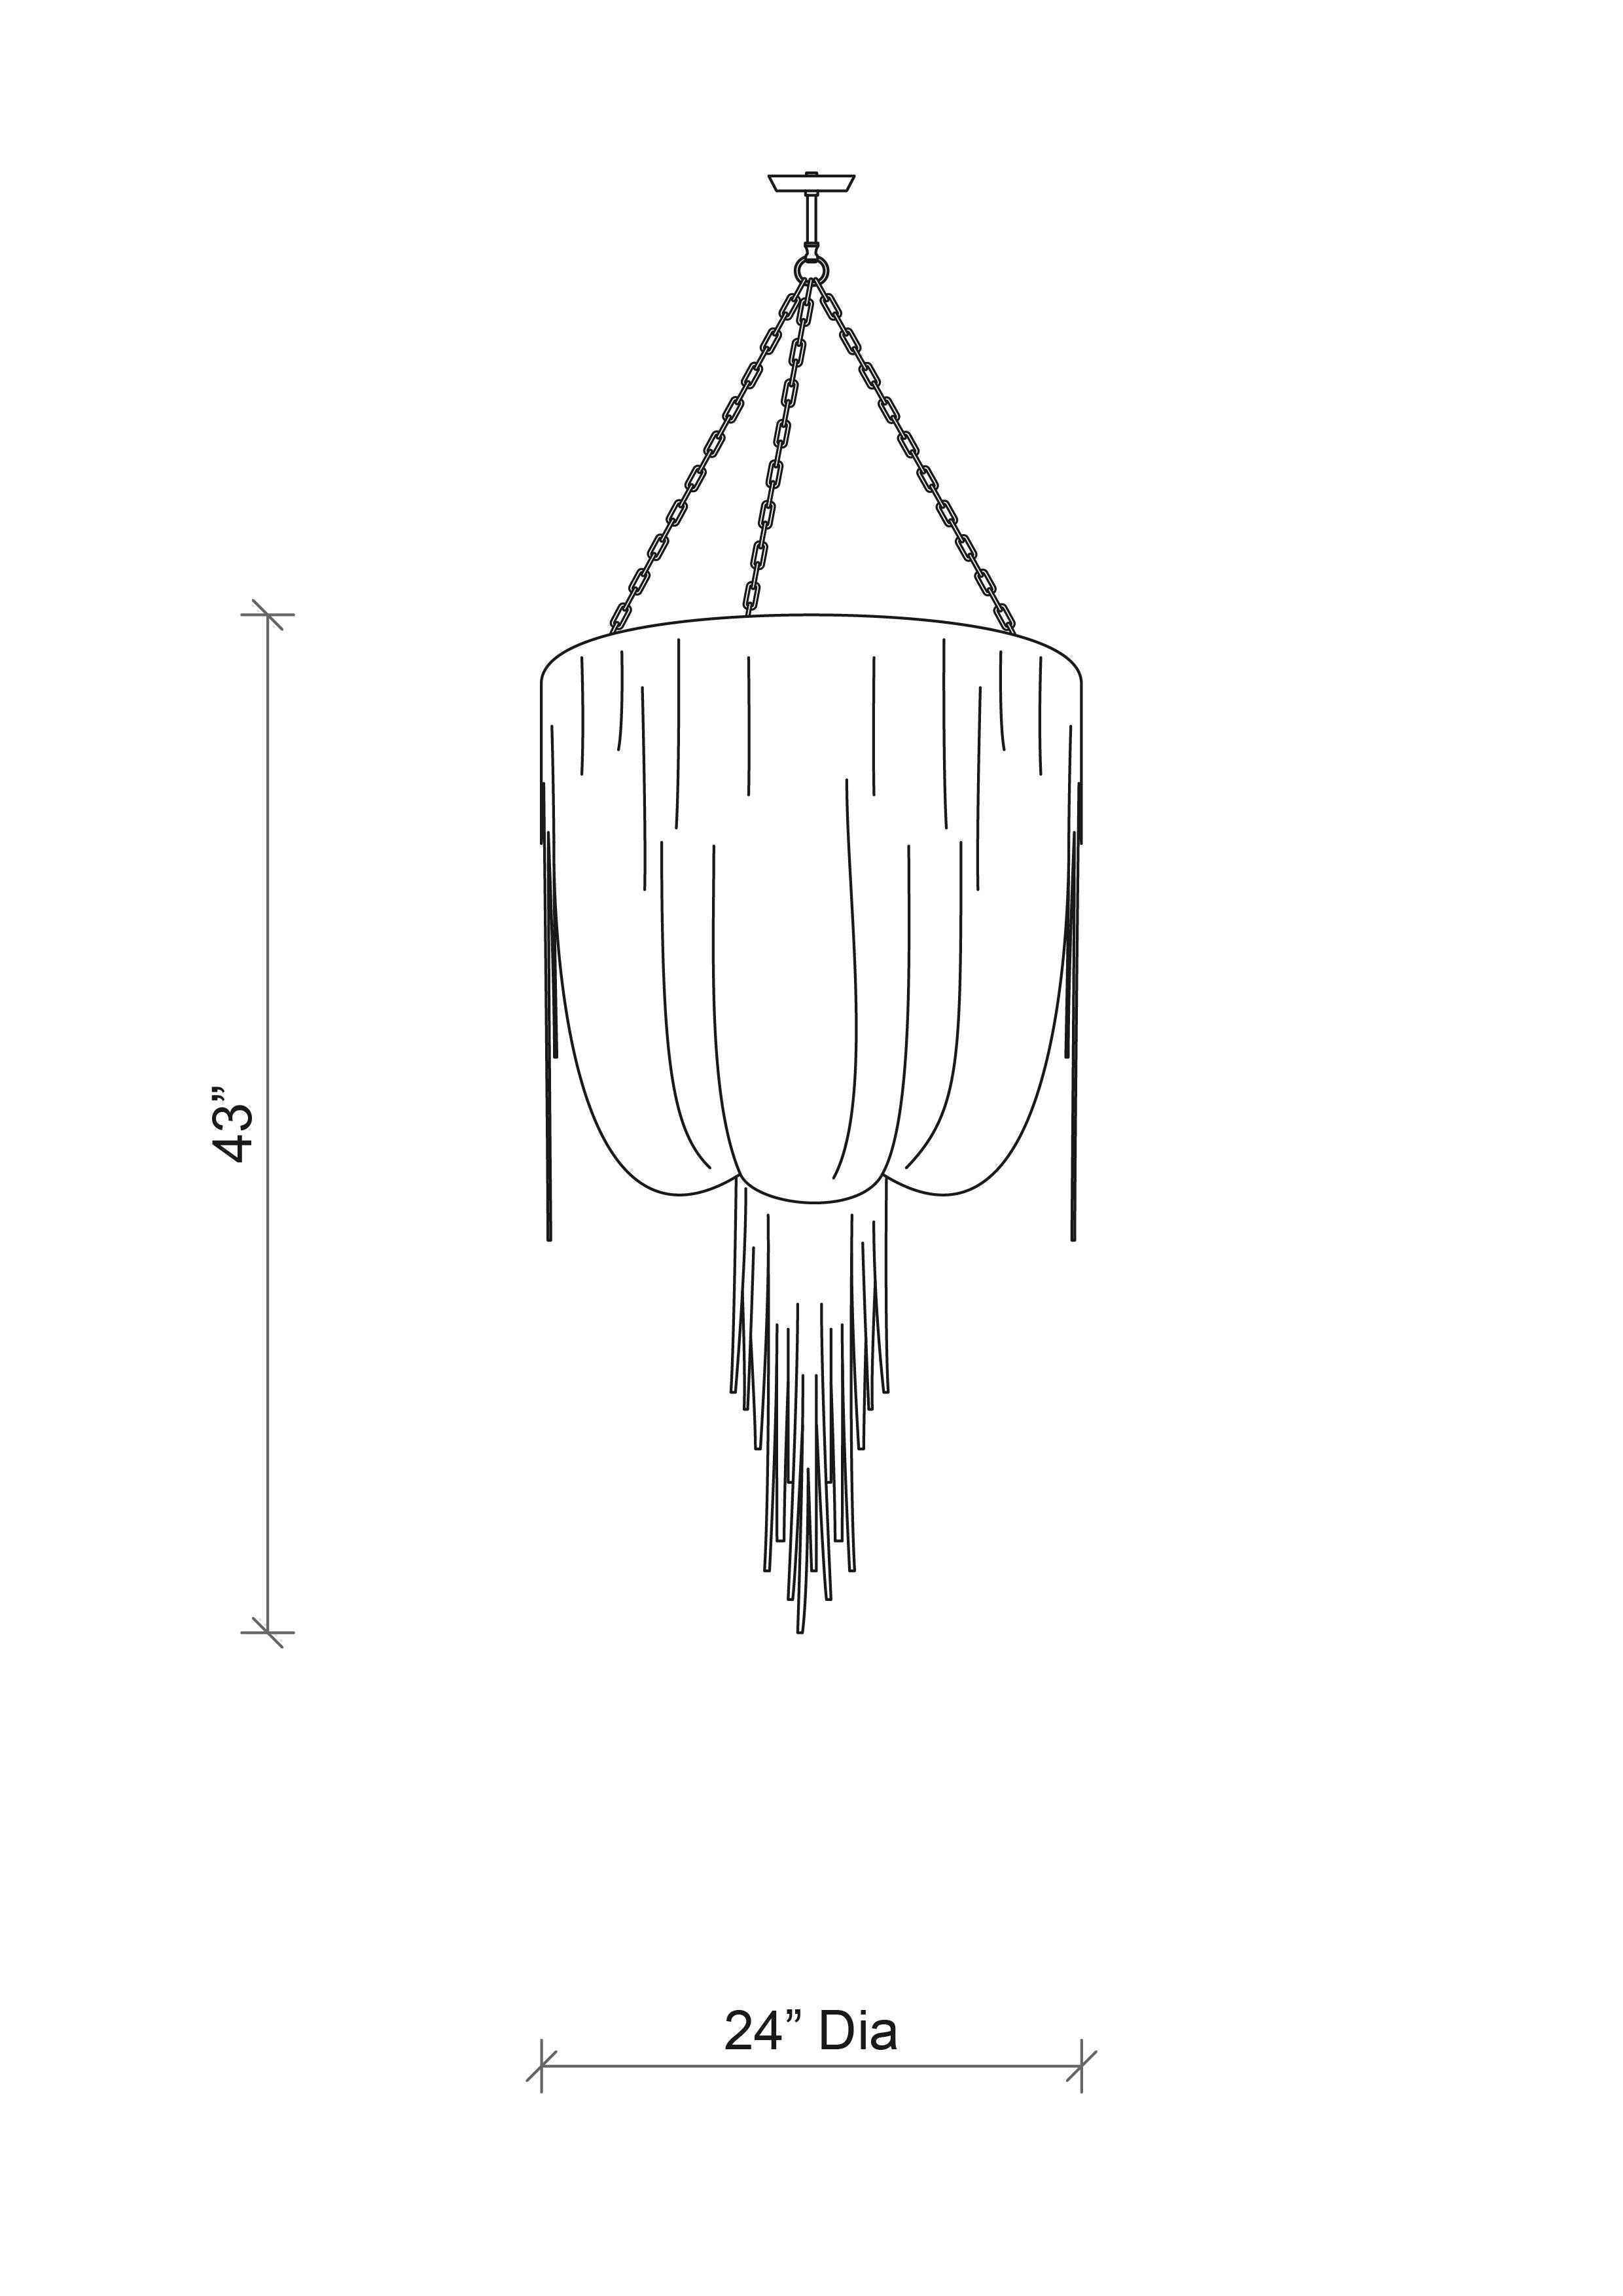 Small Round Urchin Leather Chandelier in NeKeia Leather